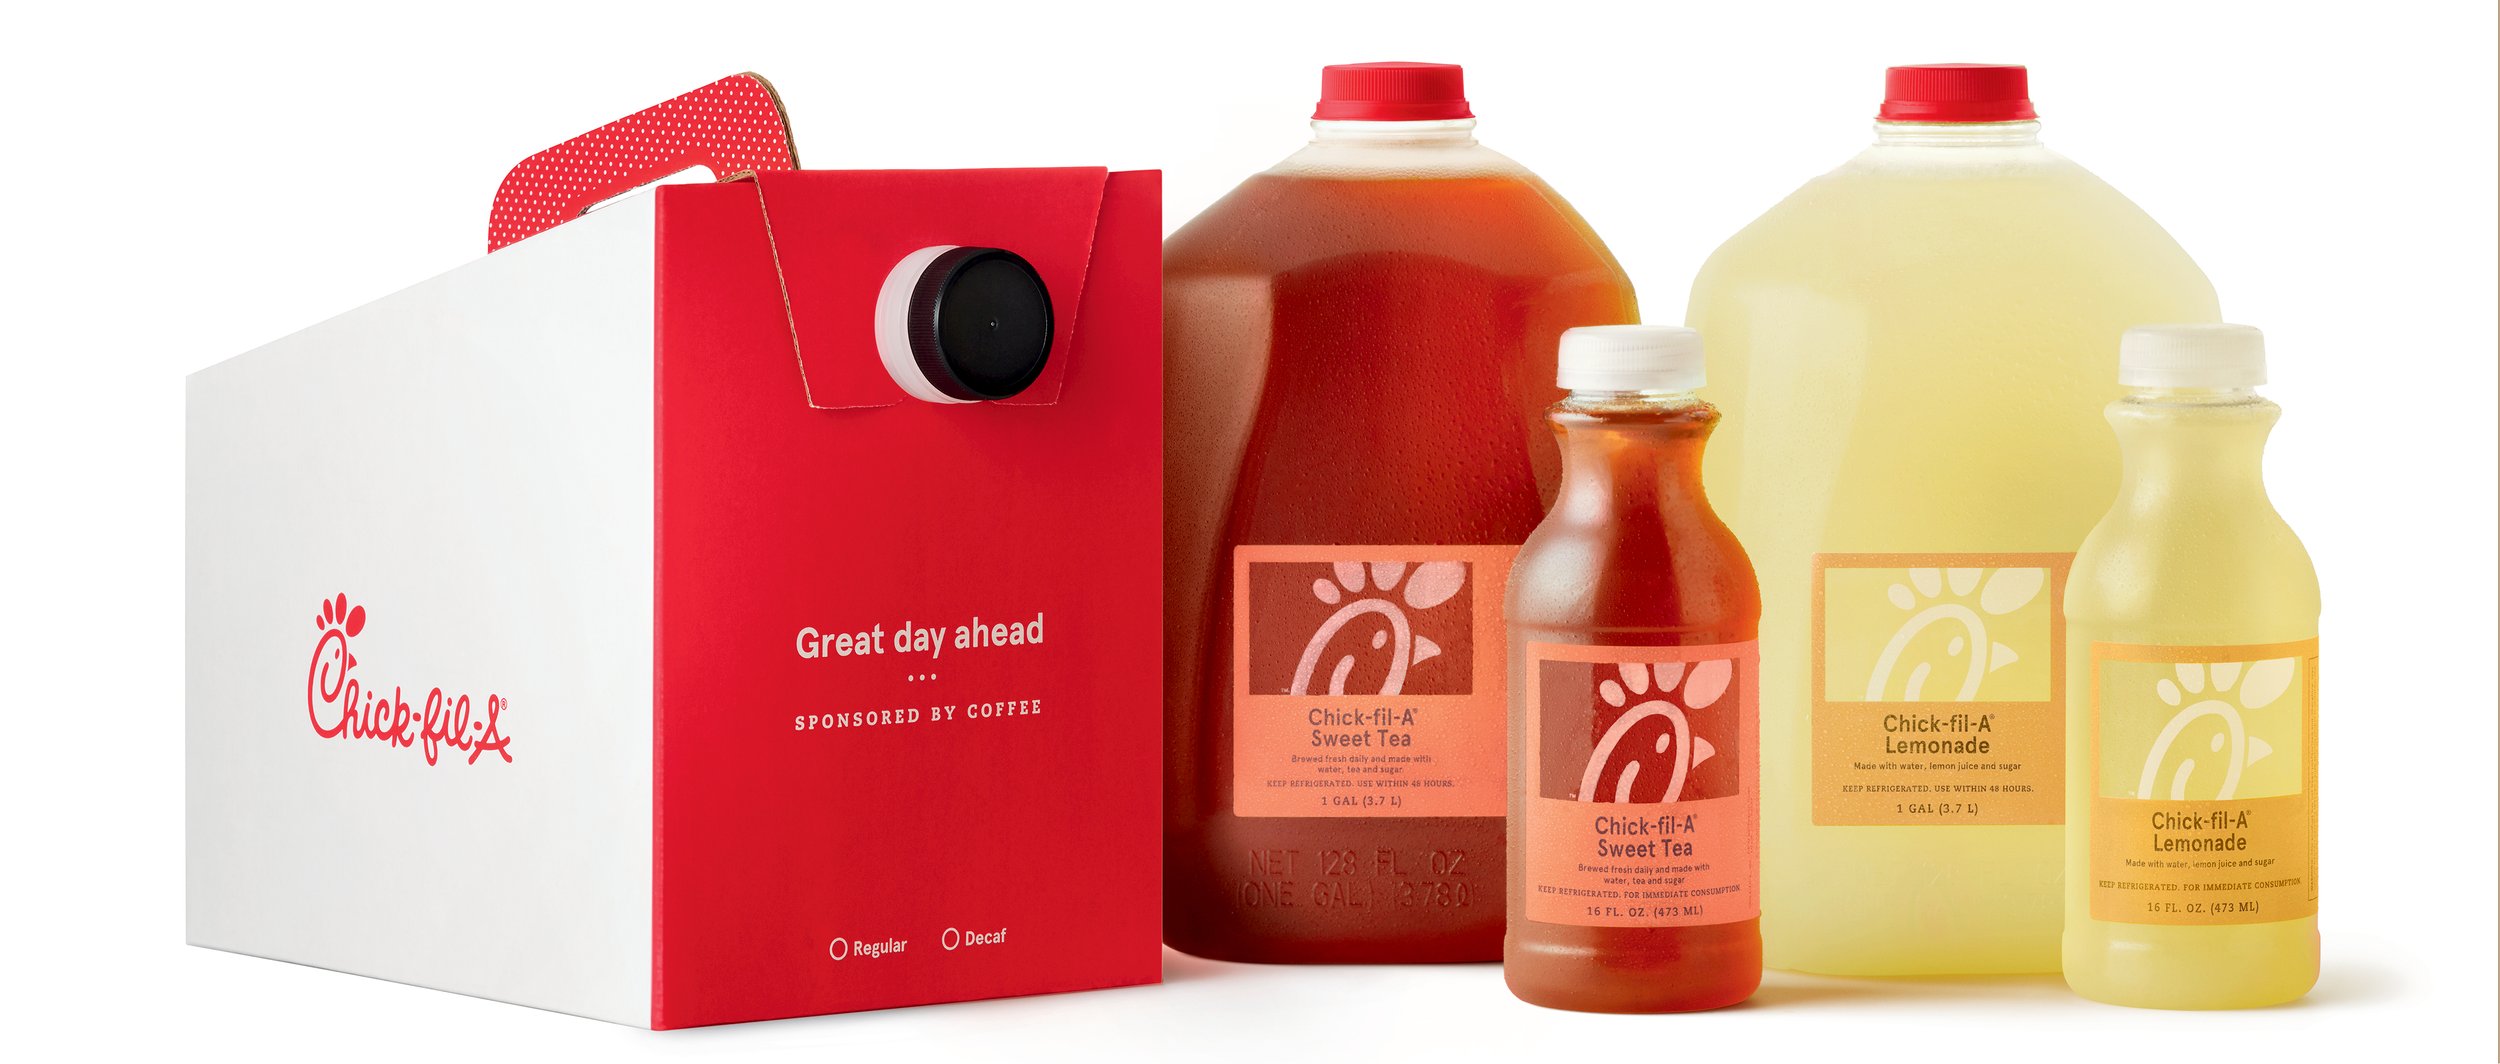 Gallons and Single Serve Bottled Iced Tea and Chick-fil-A® Lemonade Product Image_low-res.jpg